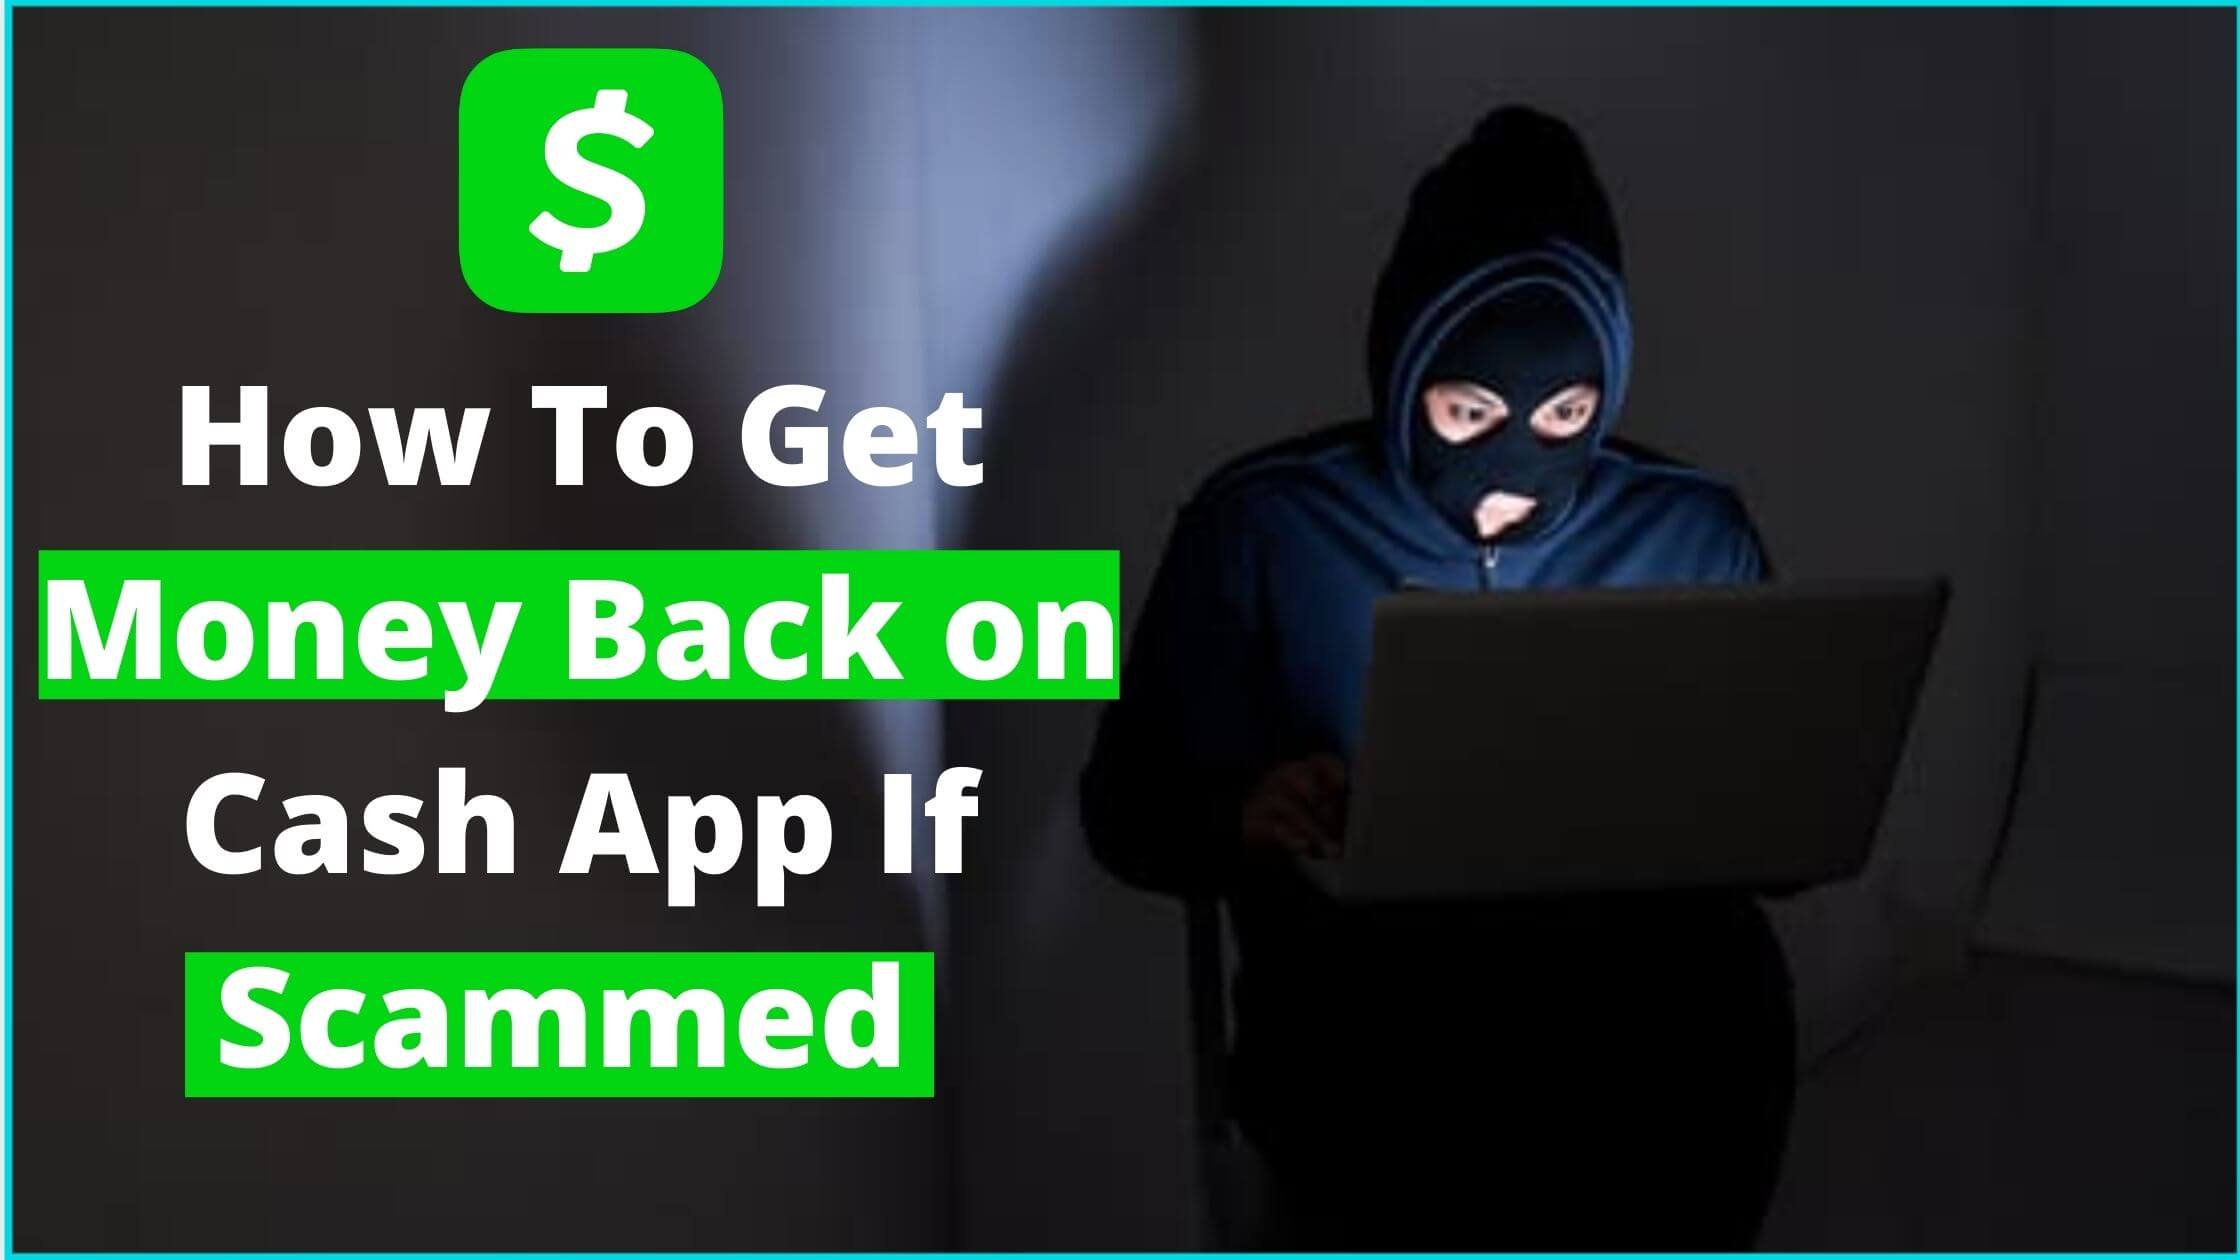 How To Get Money Back on Cash App If Scammed